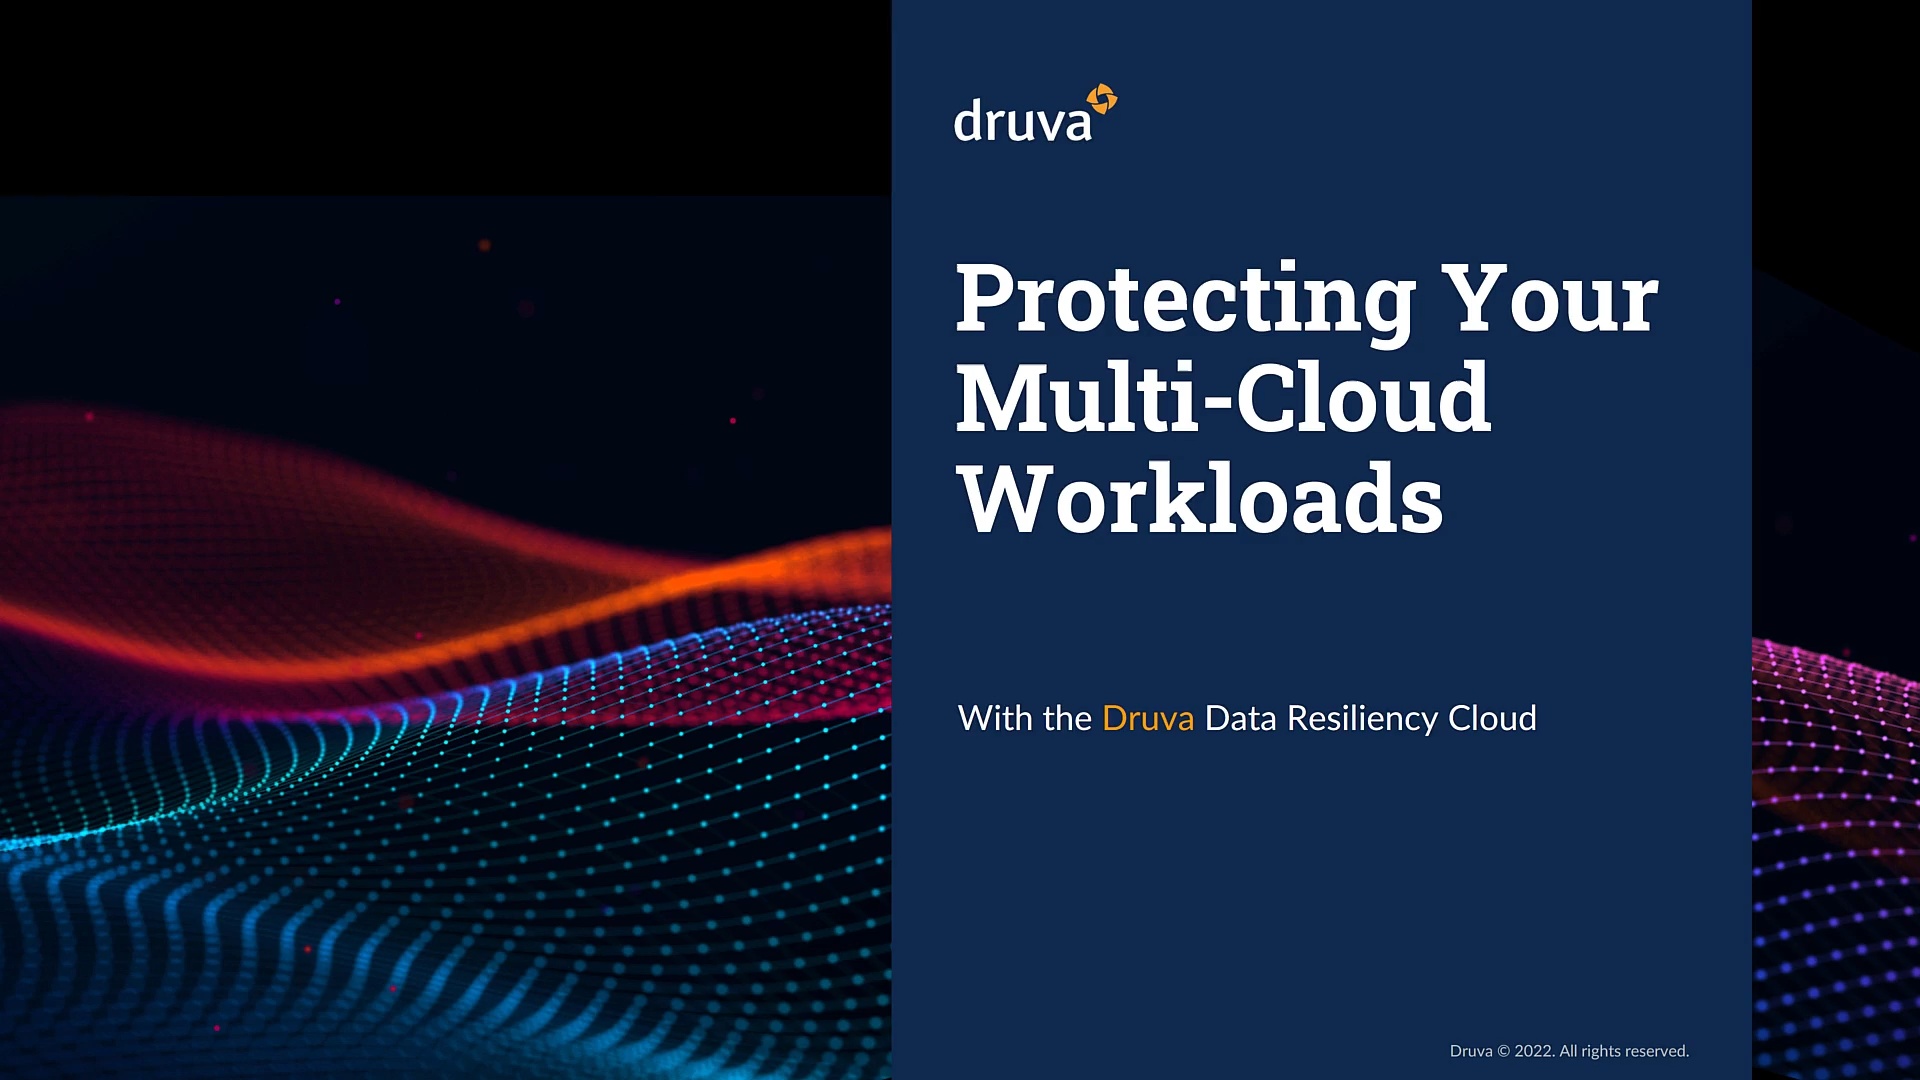 Protecting your Multi-Cloud Workloads with the Druva Data Resiliency Cloud